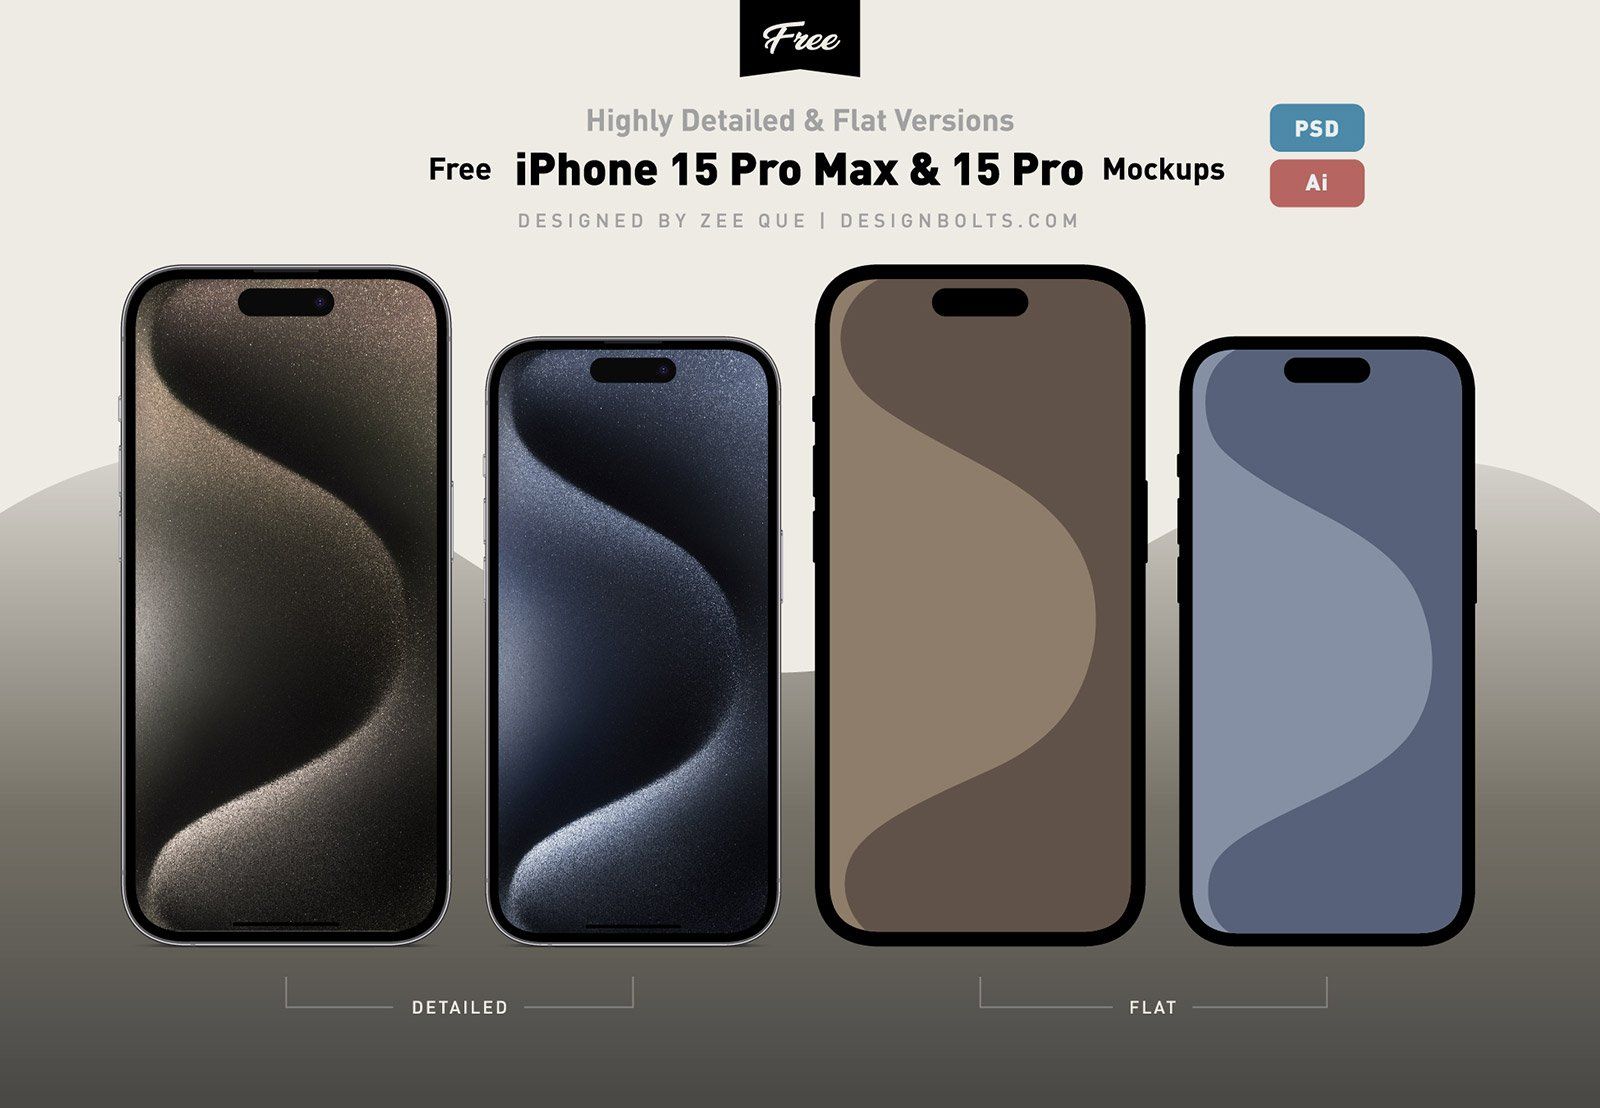 A free set of iphone 15 pro and pro max mockups